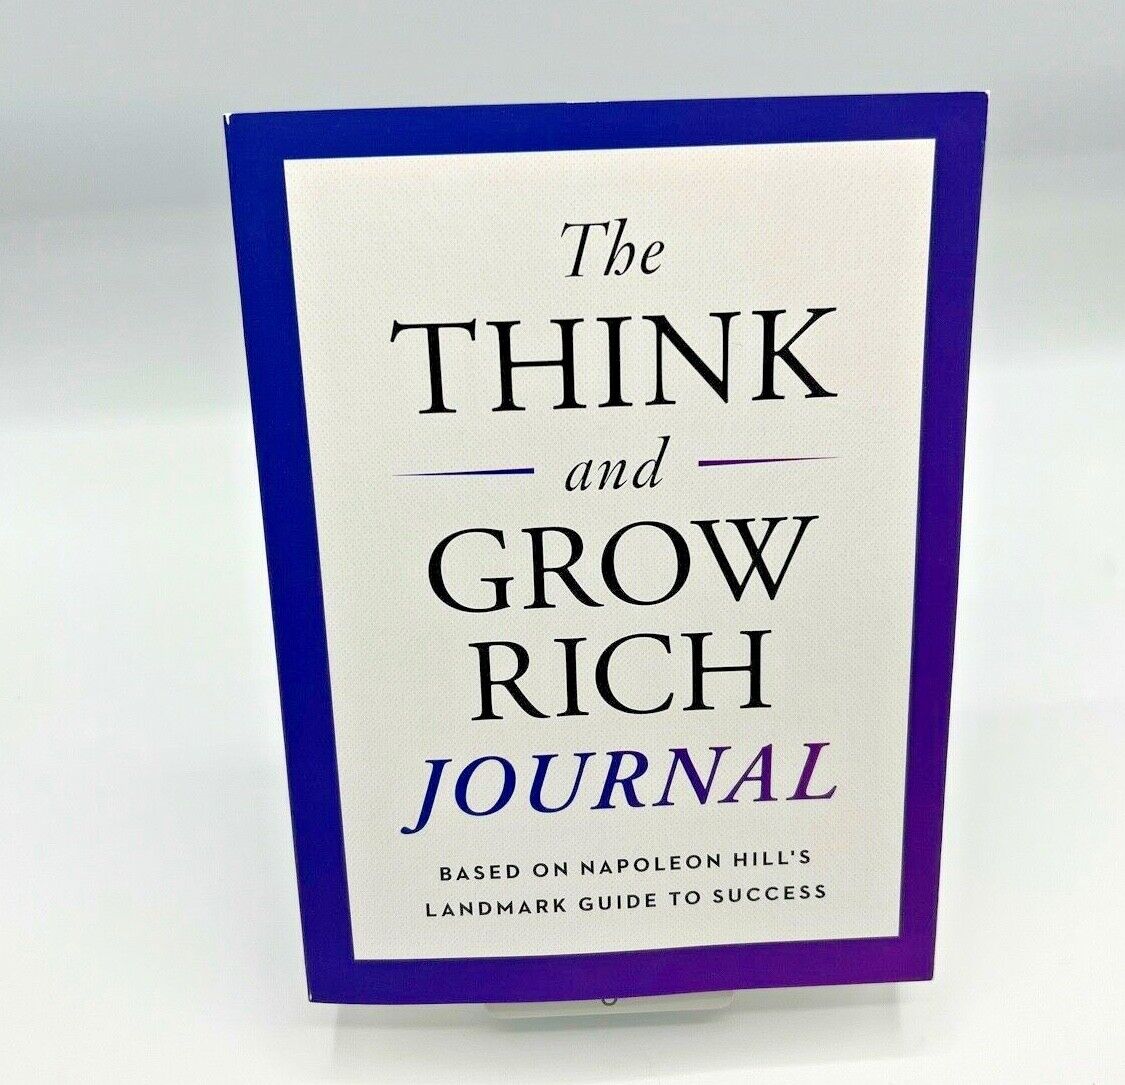 The Think and Grow Rich Journal  by Napoleon Hill at BIBLIONEPAL Bookstore